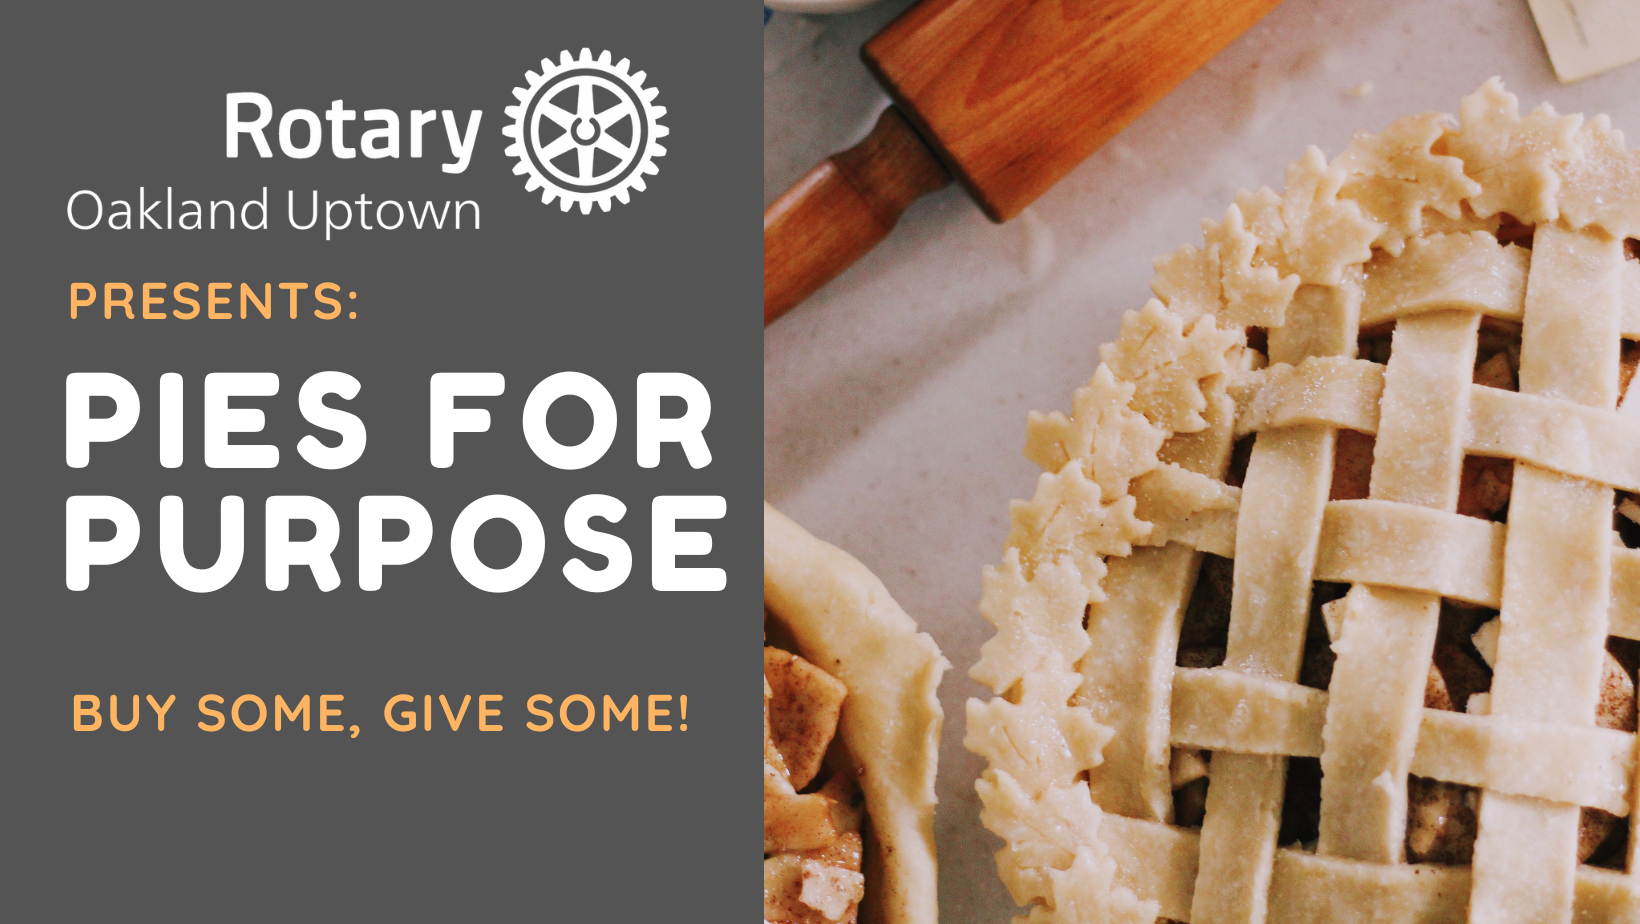 Freshly Baked Lattice Pie Image with Text Announcing Pies for Purpose Fundraiser